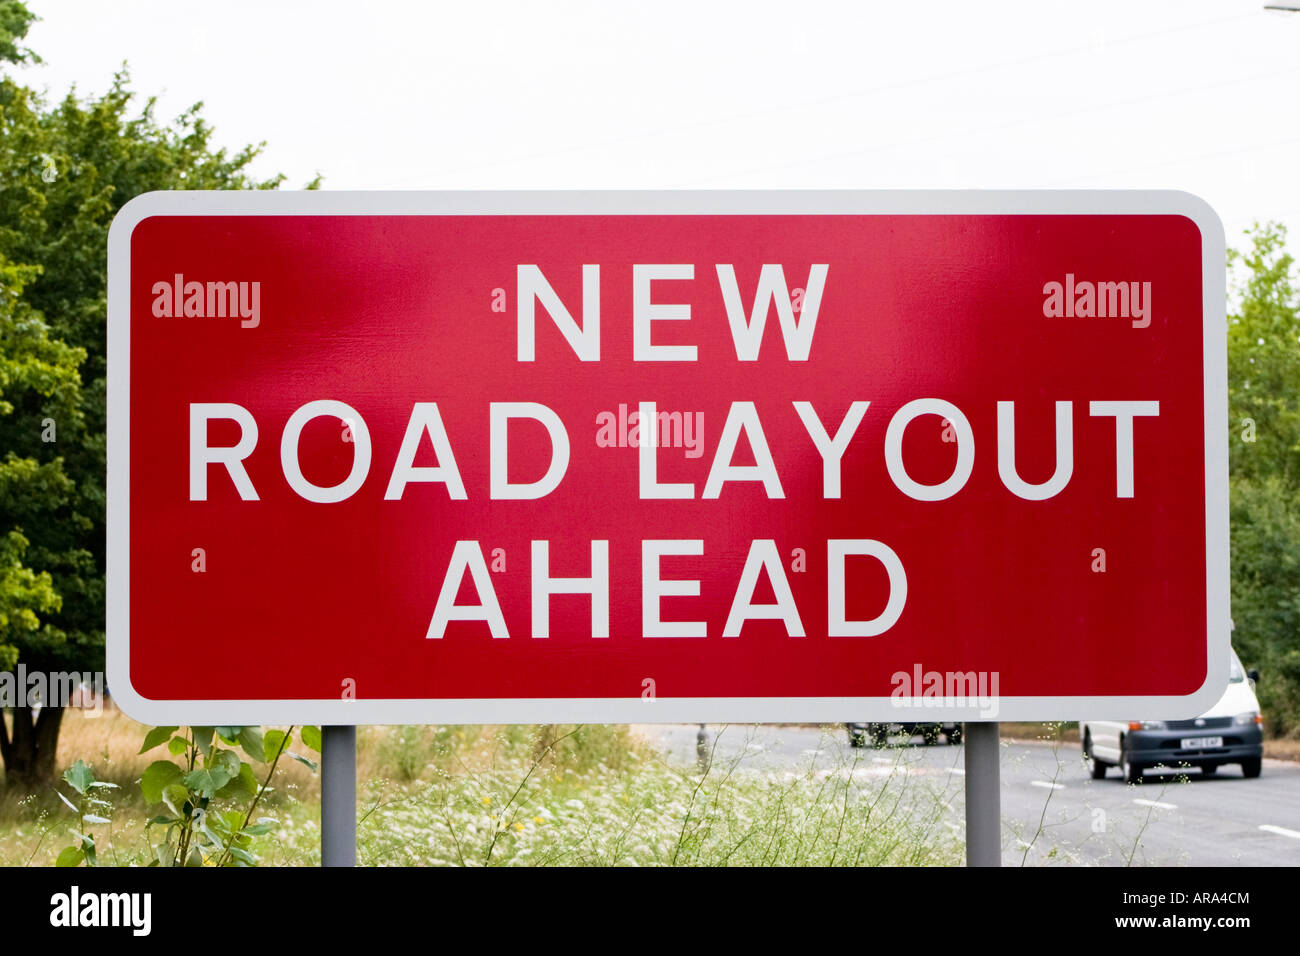 New road layout ahead road sign Stock Photo